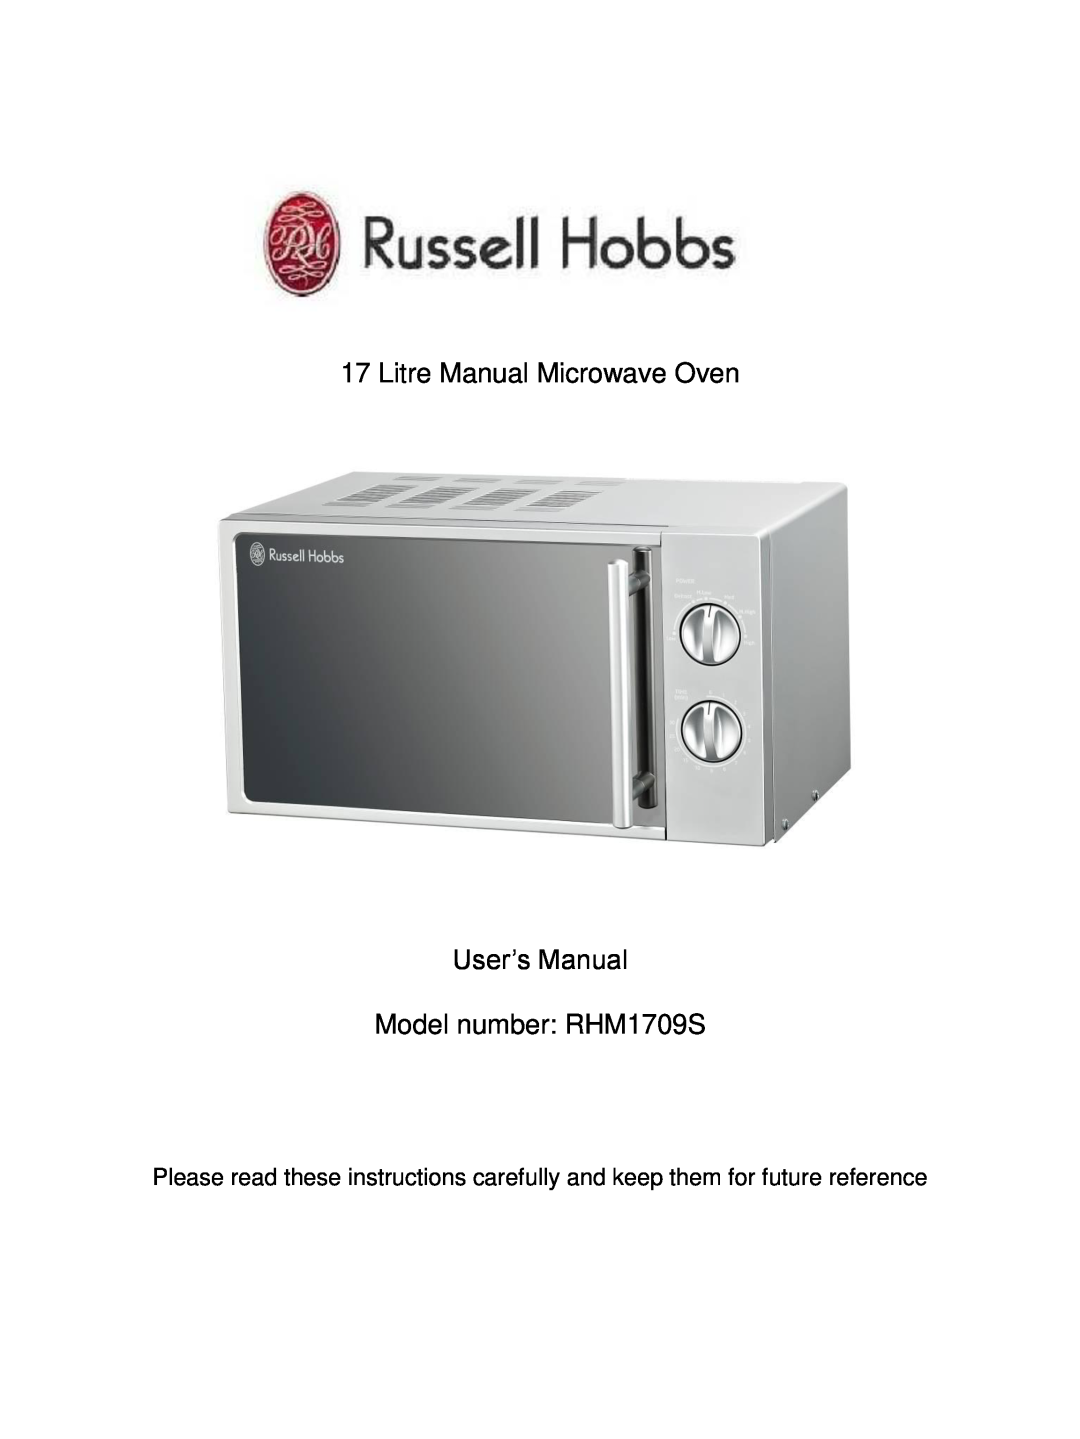 Russell Hobbs user manual Litre Manual Microwave Oven User’s Manual, Model number RHM1709S 